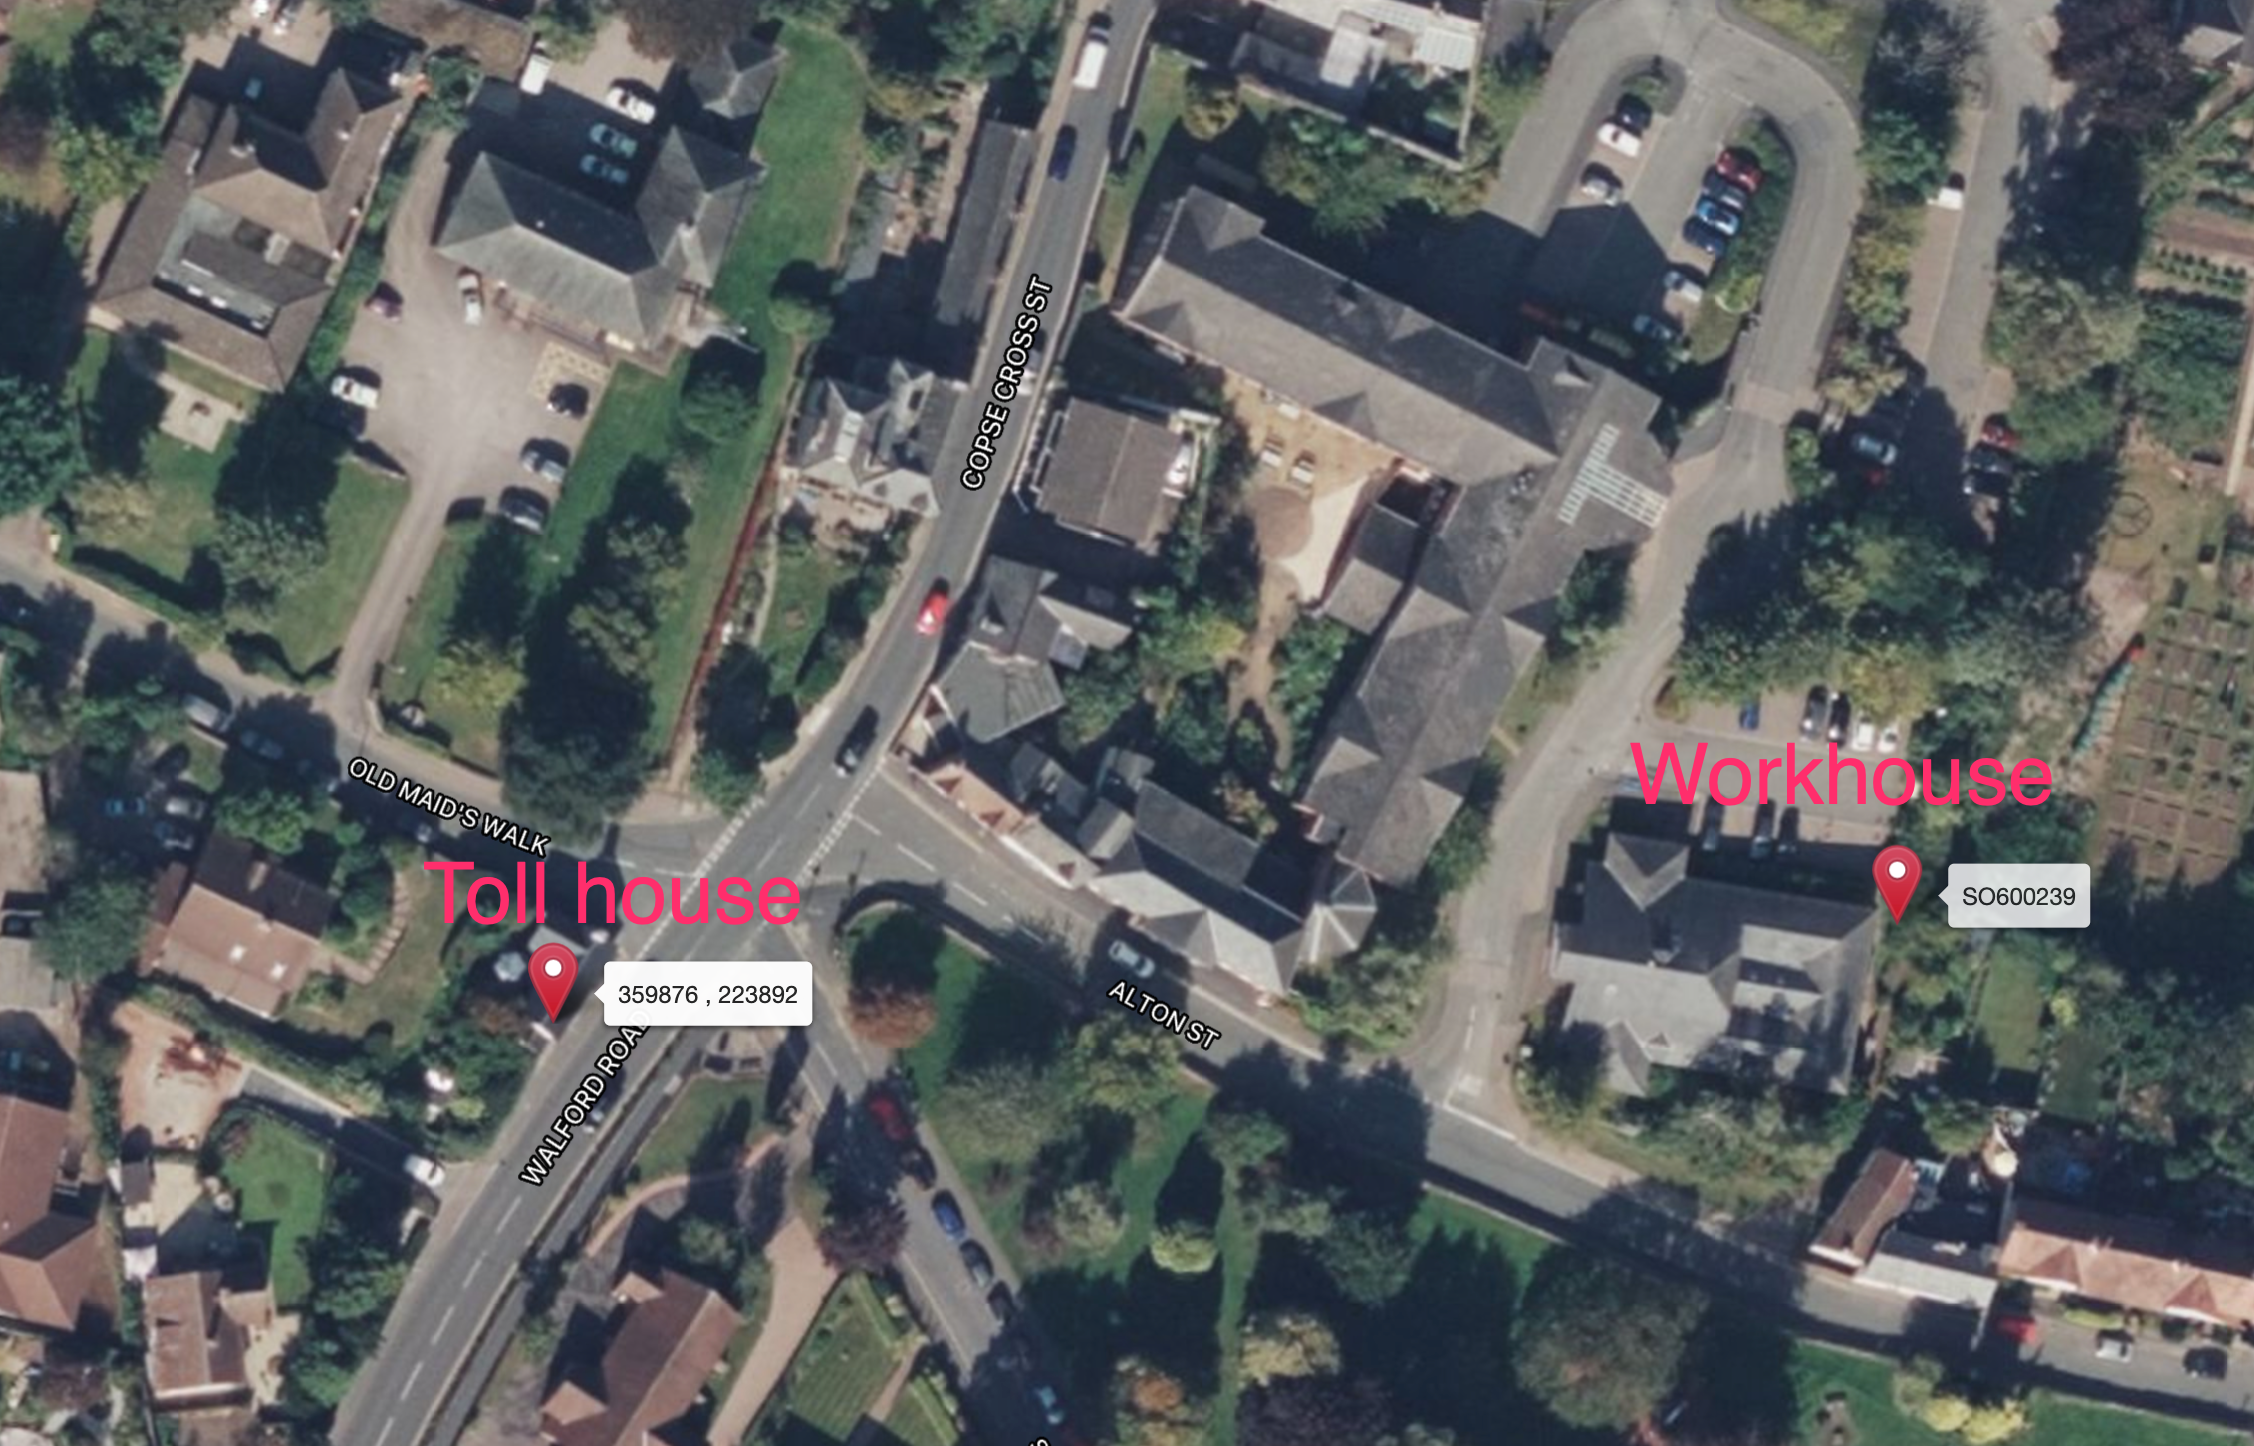 An aerial view of the crossroads today, showing the site of the old workhouse and toll house. Alton Street is Old Town Street.